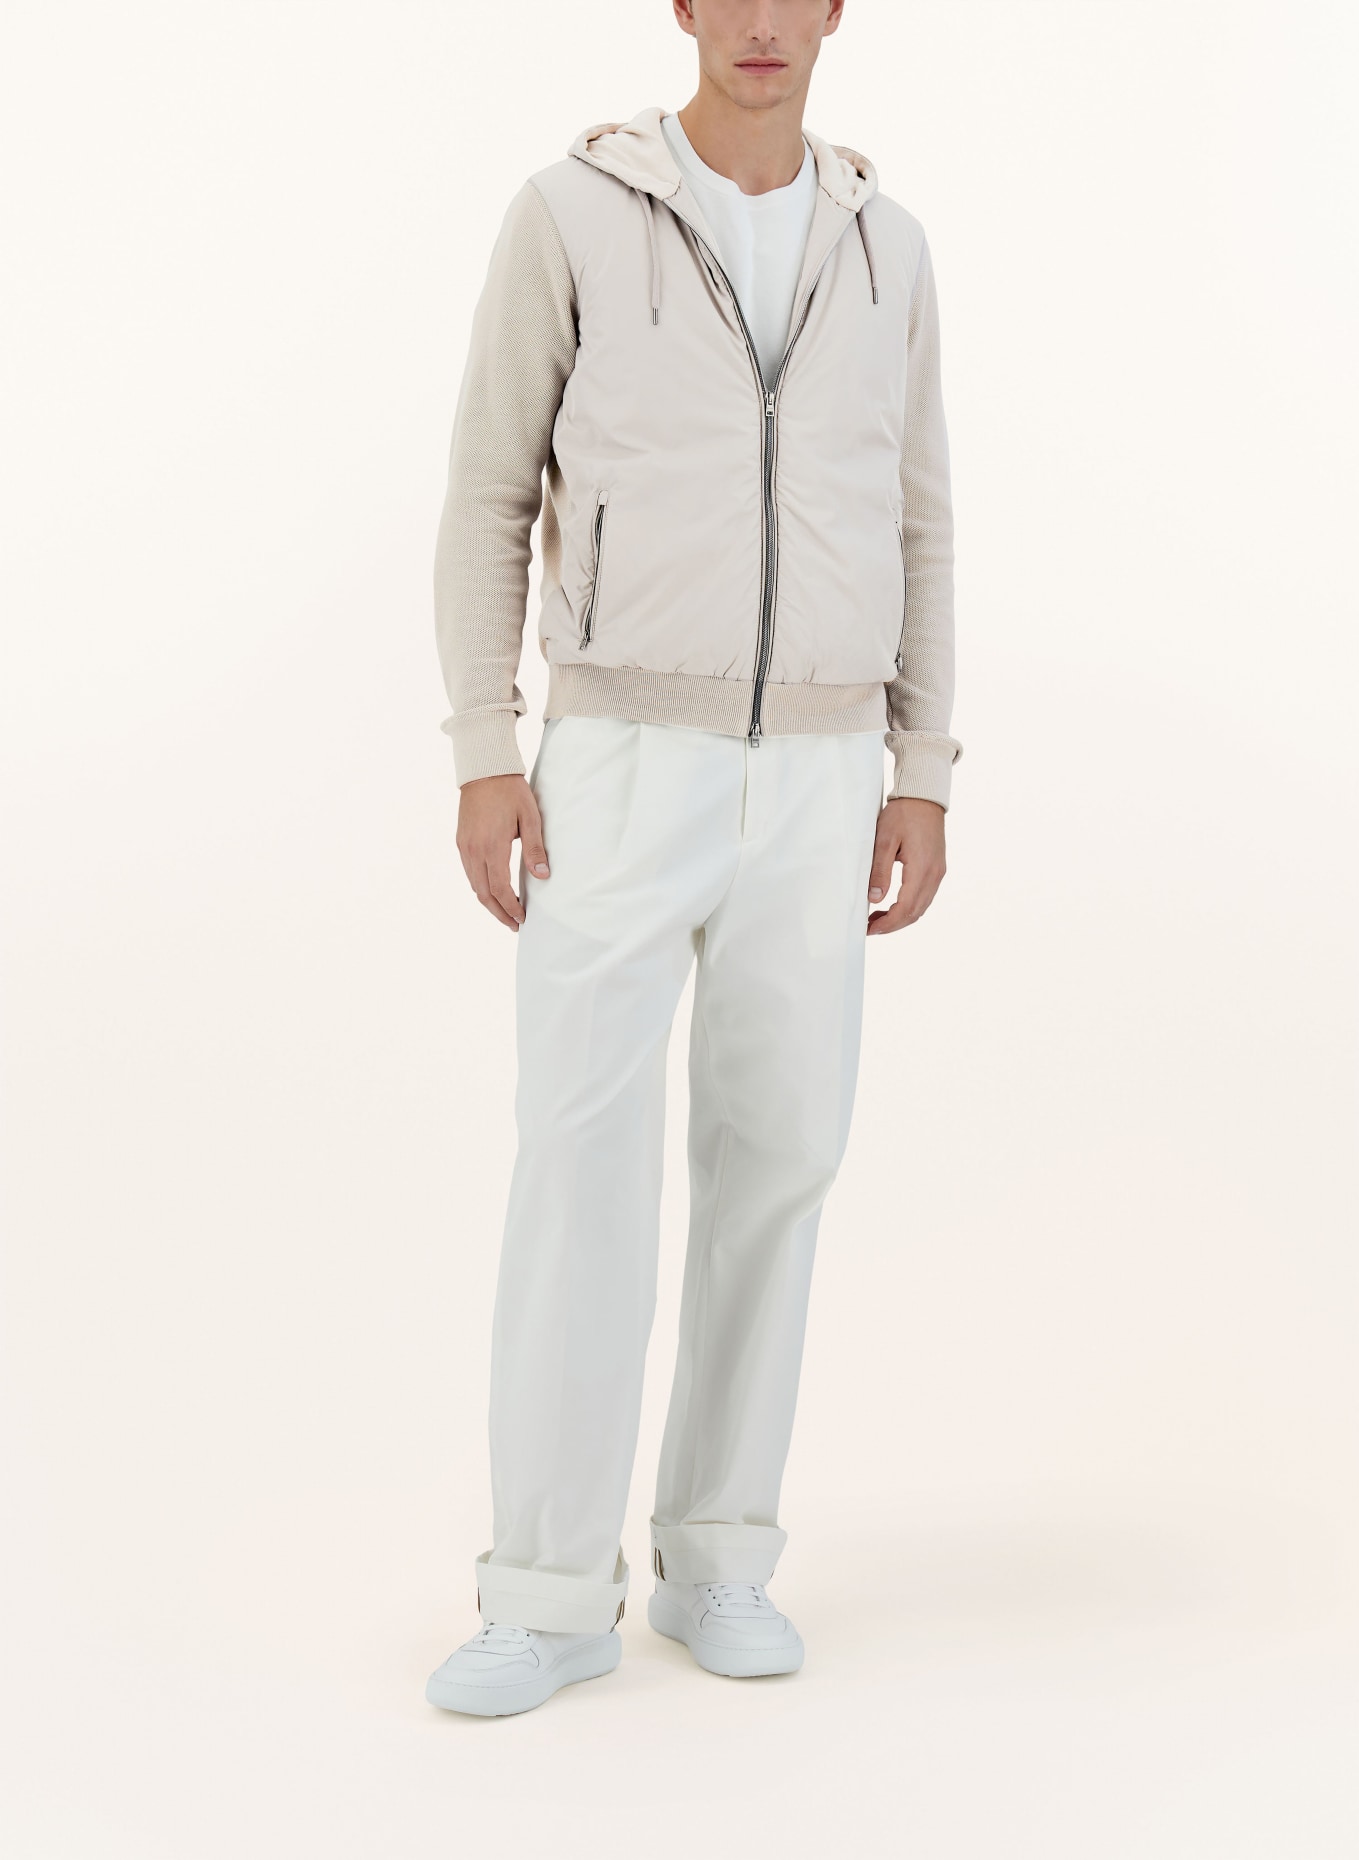 HERNO Jacket in mixed materials, Color: LIGHT GRAY (Image 4)